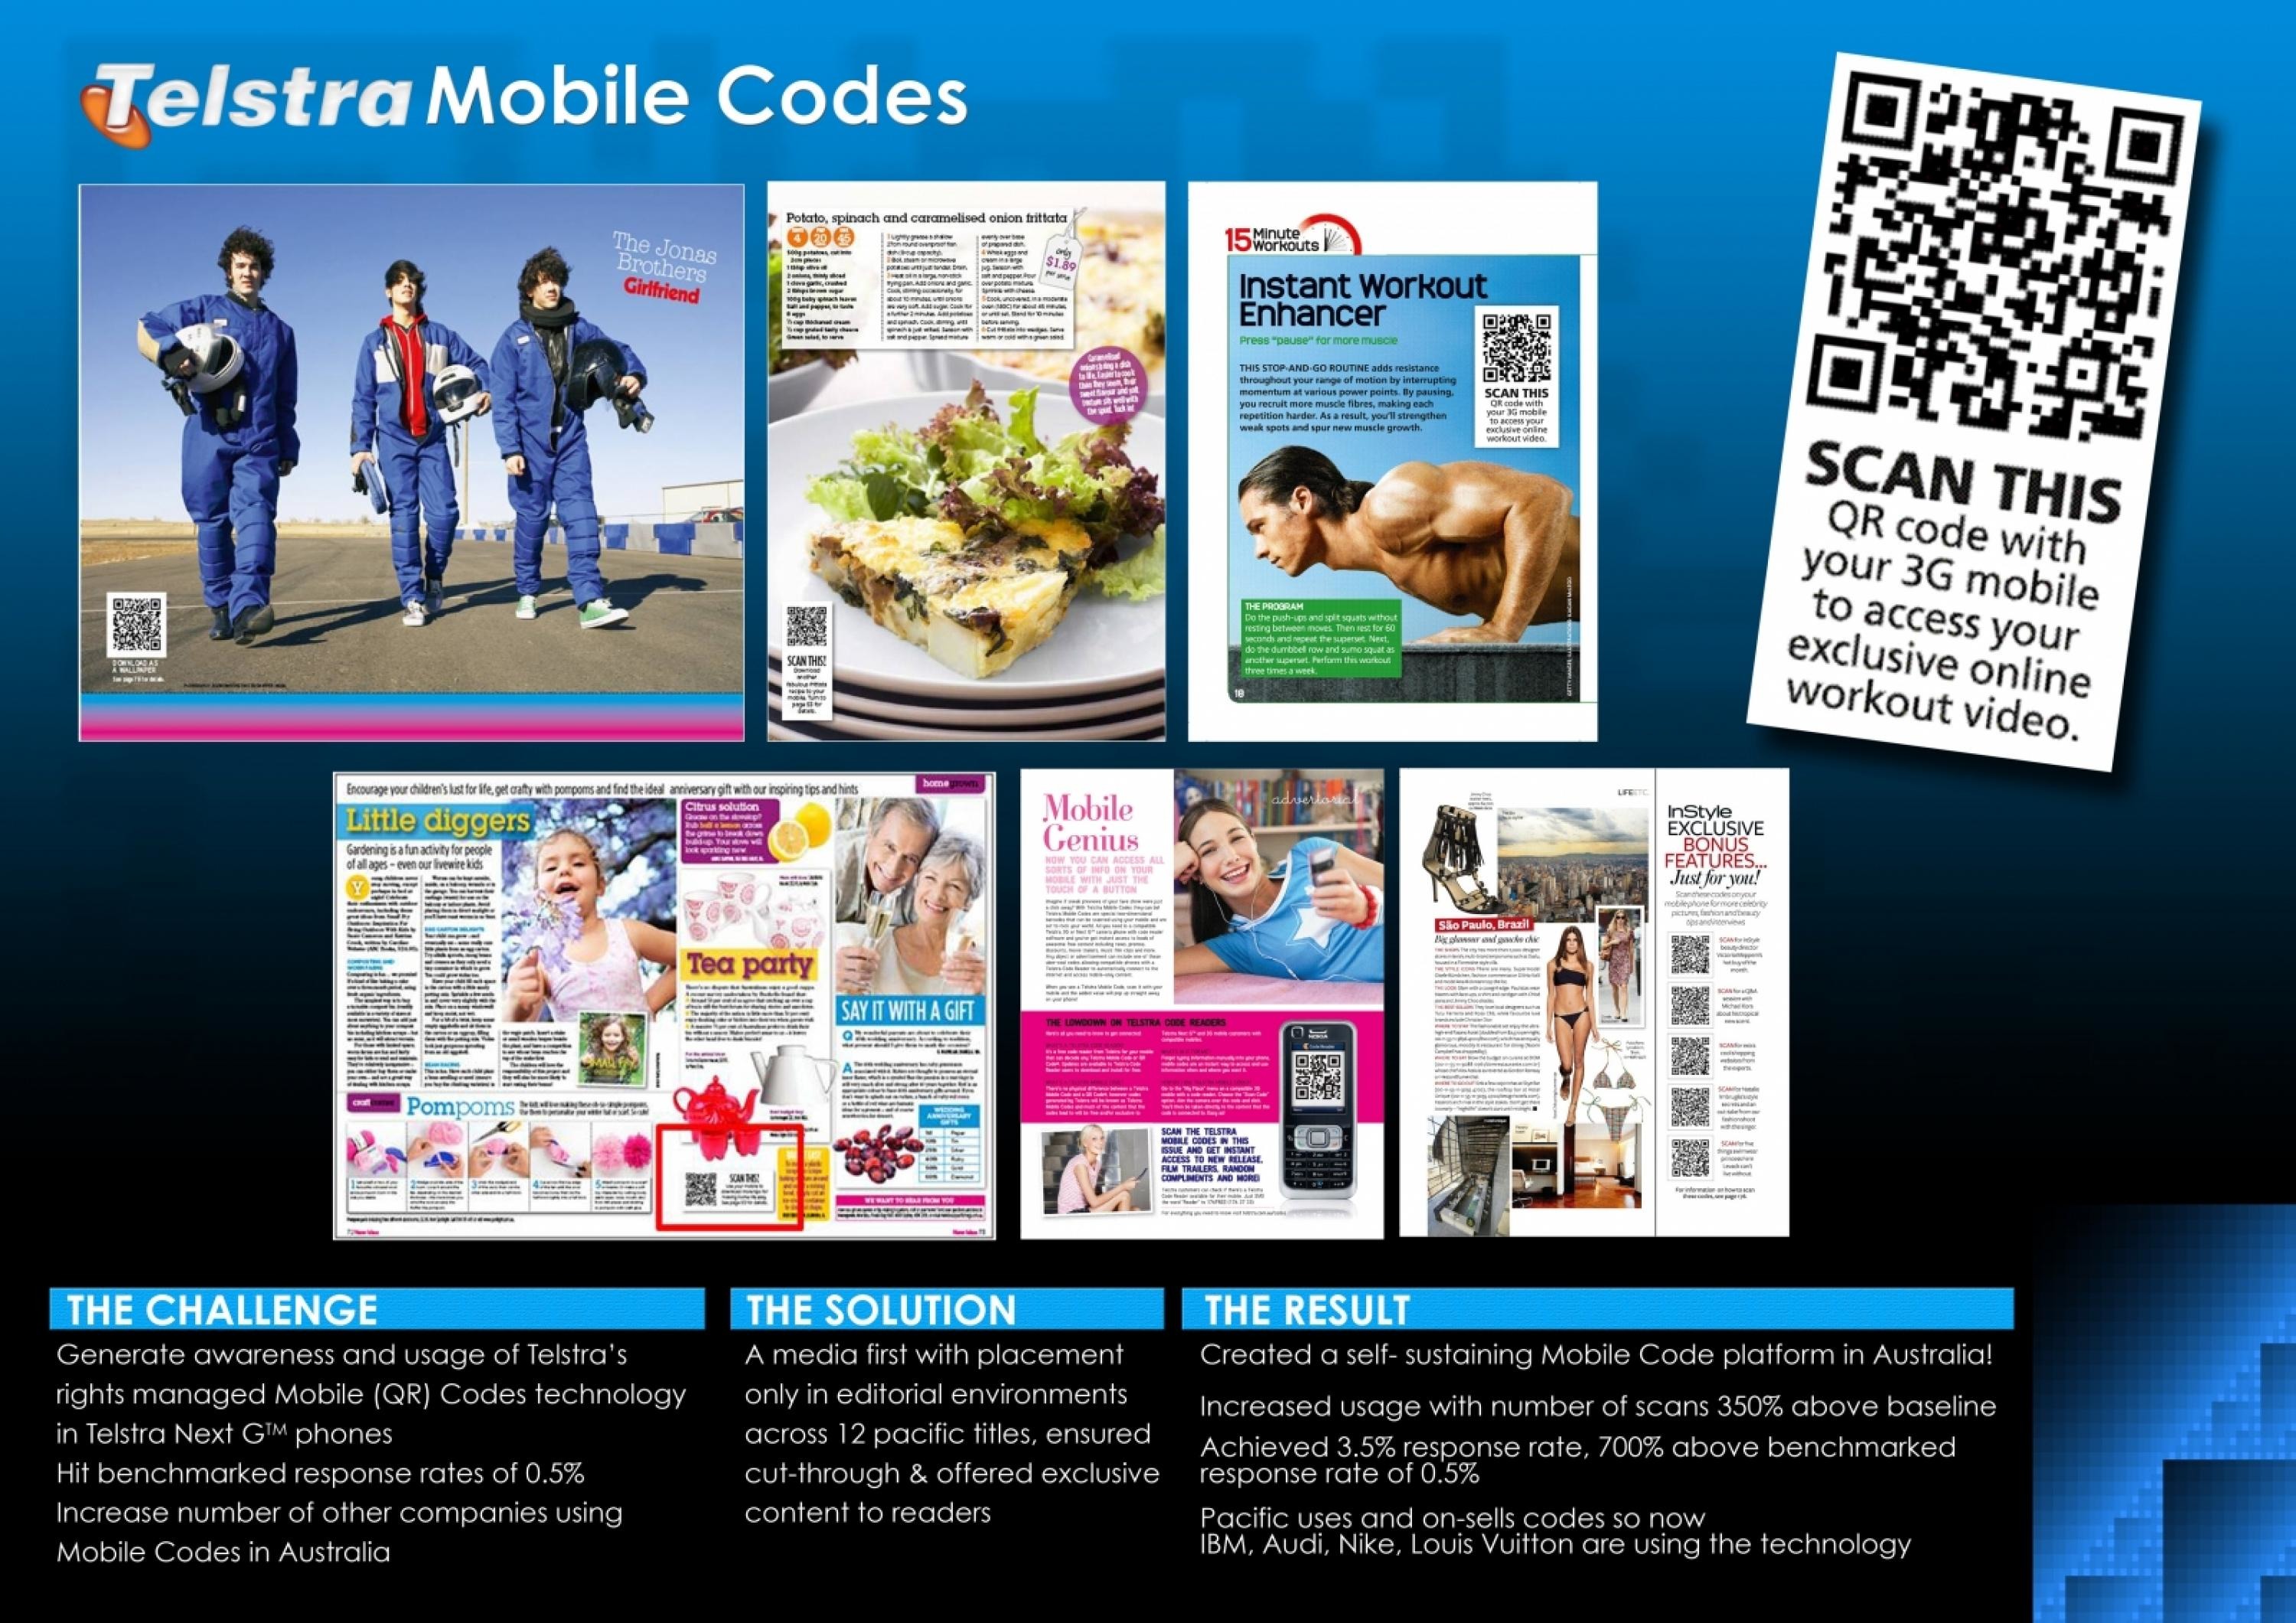 MOBILE CODES